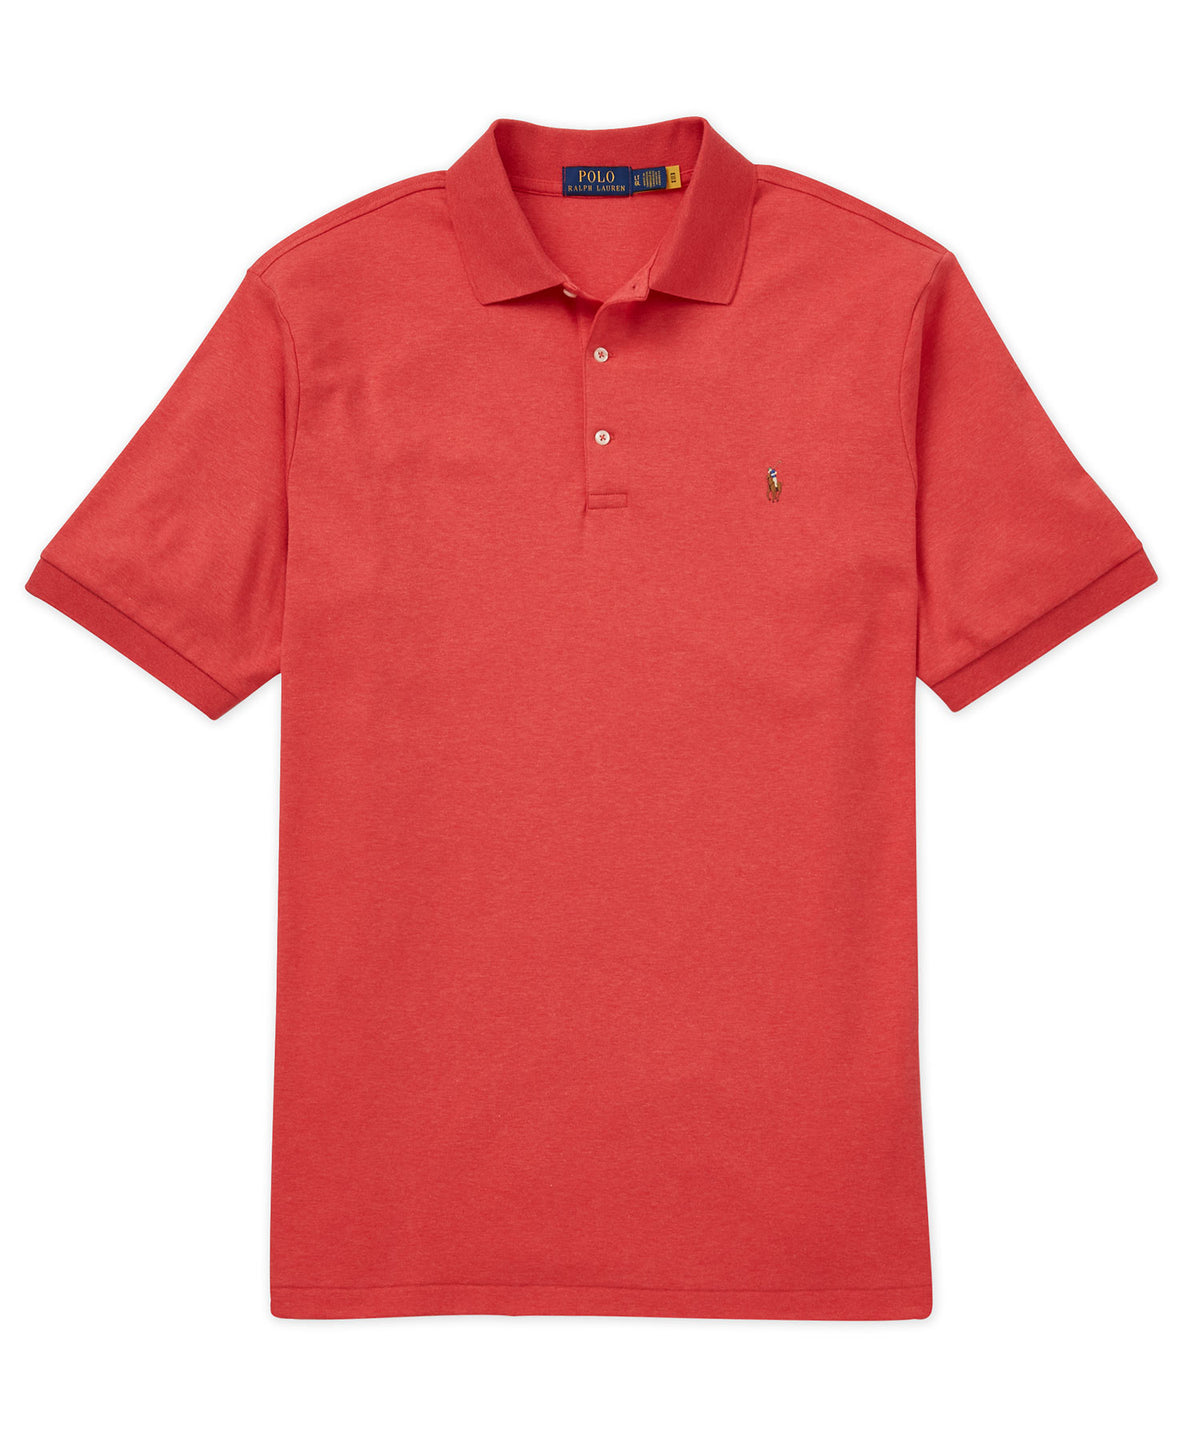 Polo Ralph Lauren Classic Fit Soft Cotton Polo Shirt, Sunrise Red / Wh –  Oxford & Evergreen